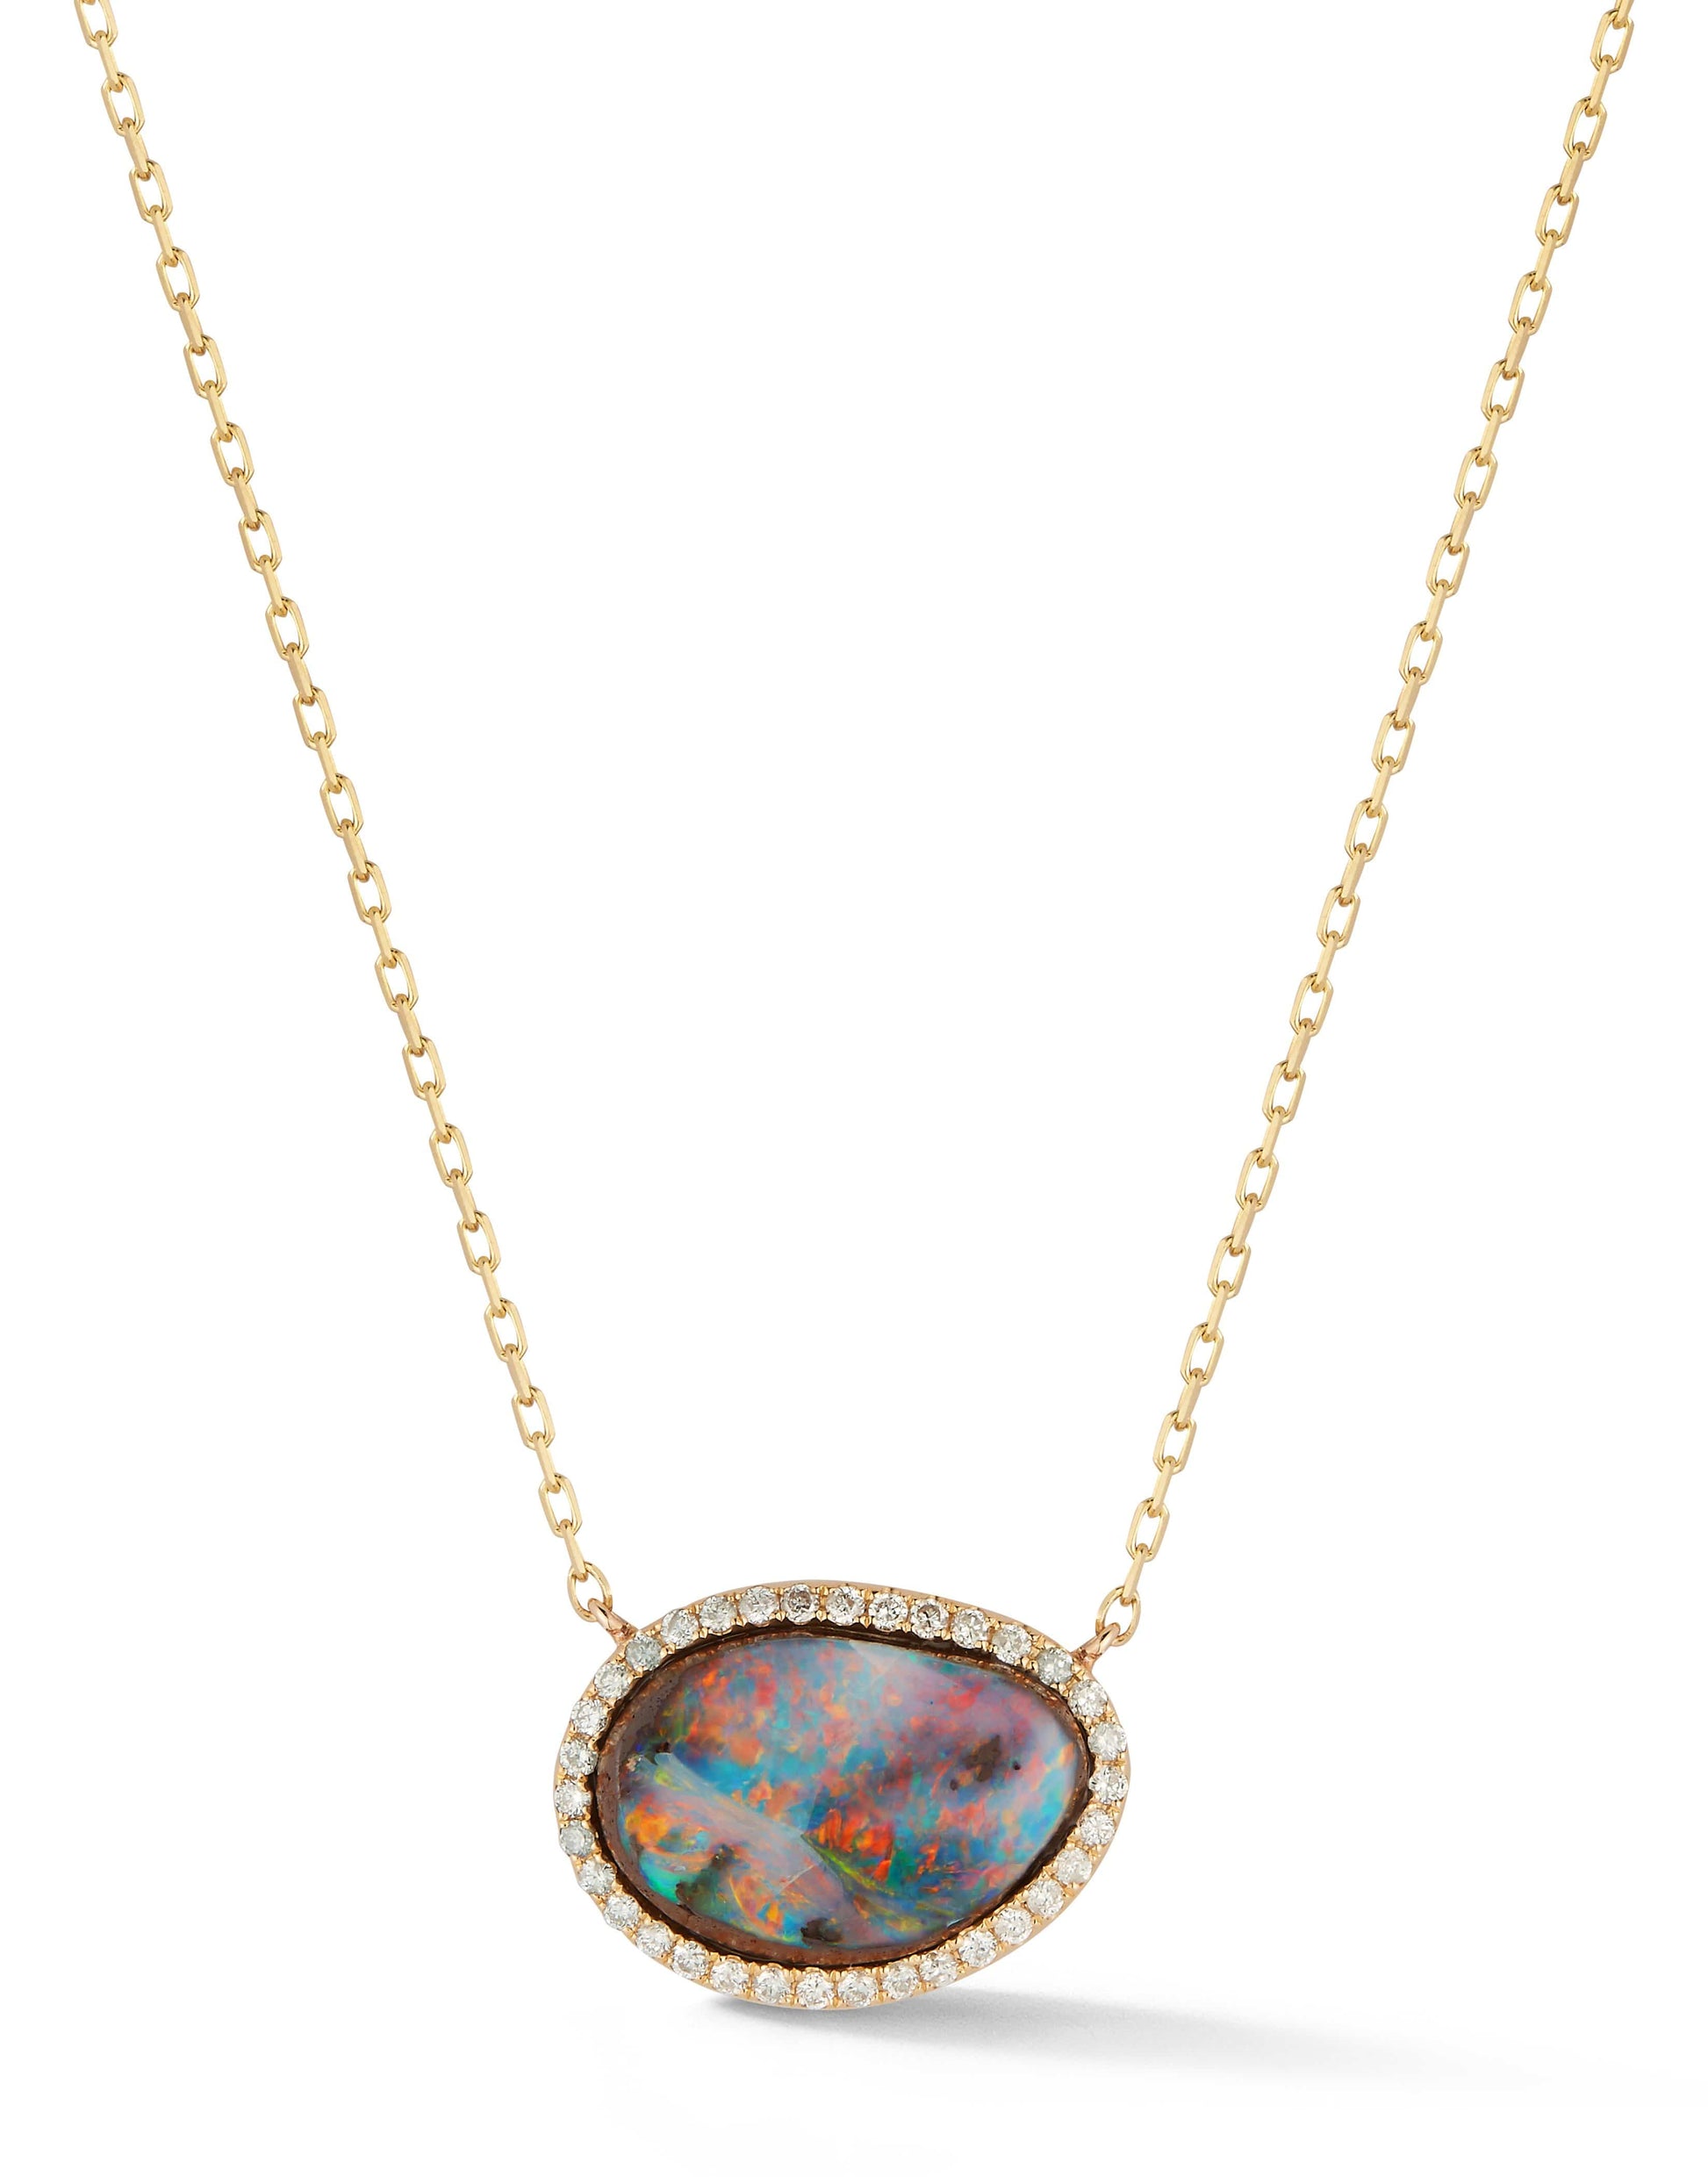 KATHERINE JETTER-Boulder Opal and Diamond Pendant Necklace-YELLOW GOLD